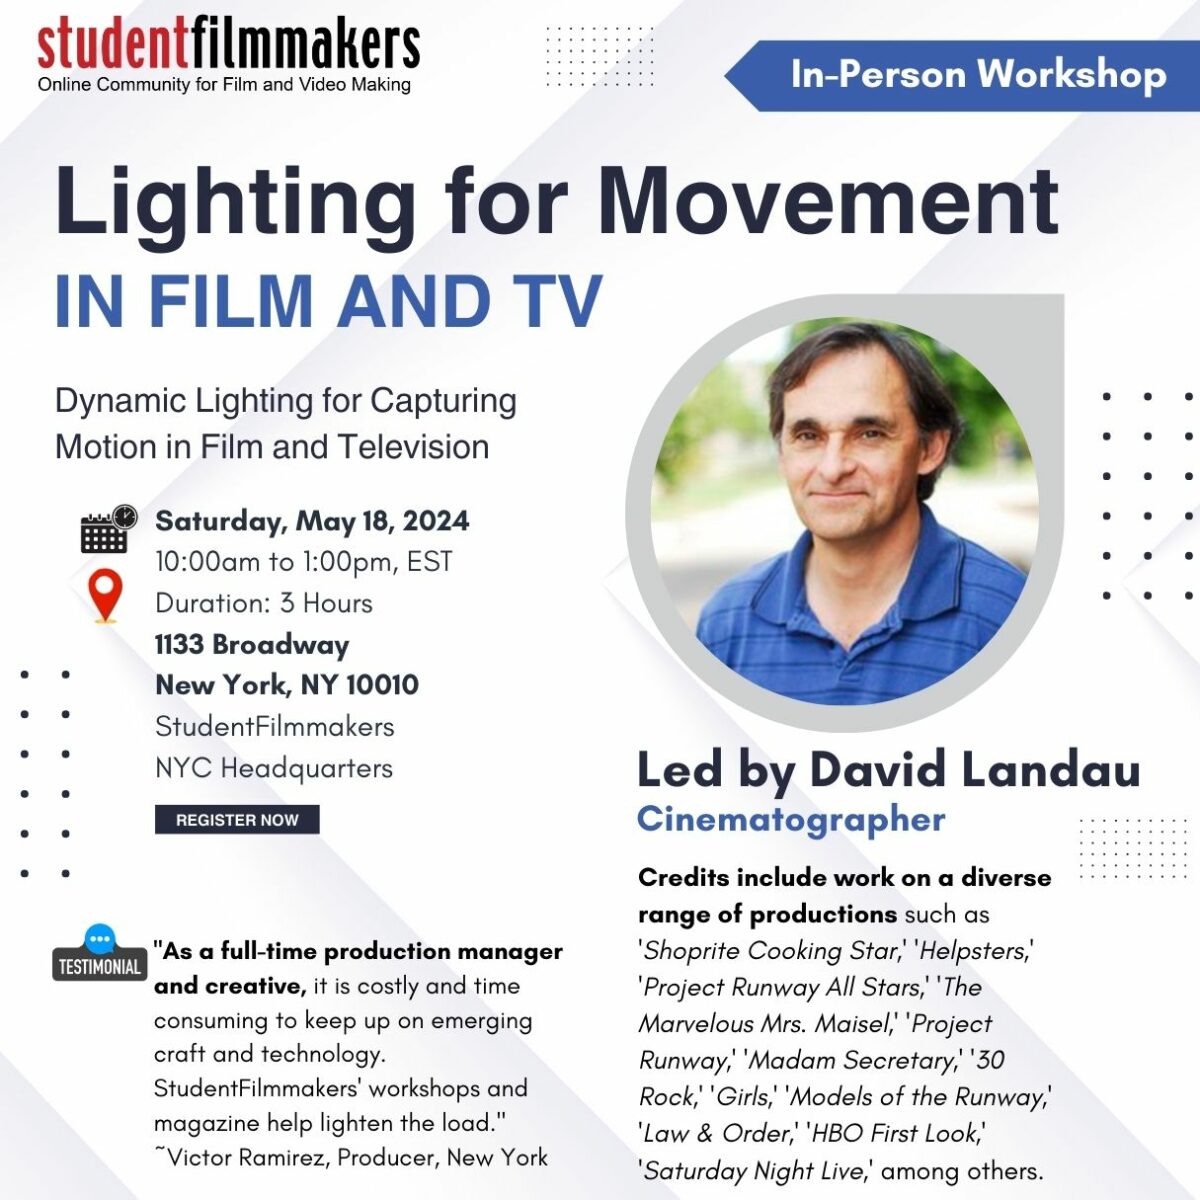 StudentFilmmakers.com In-Person Workshop - Lighting for Movement in Film and TV: Dynamic Lighting for Capturing Motion in Film and Television Led by David Landau Date: Saturday, May 18, 2024 Time: 10am to 1pm Duration: 3 hours. Location: 1133 Broadway, New York, NY 10010